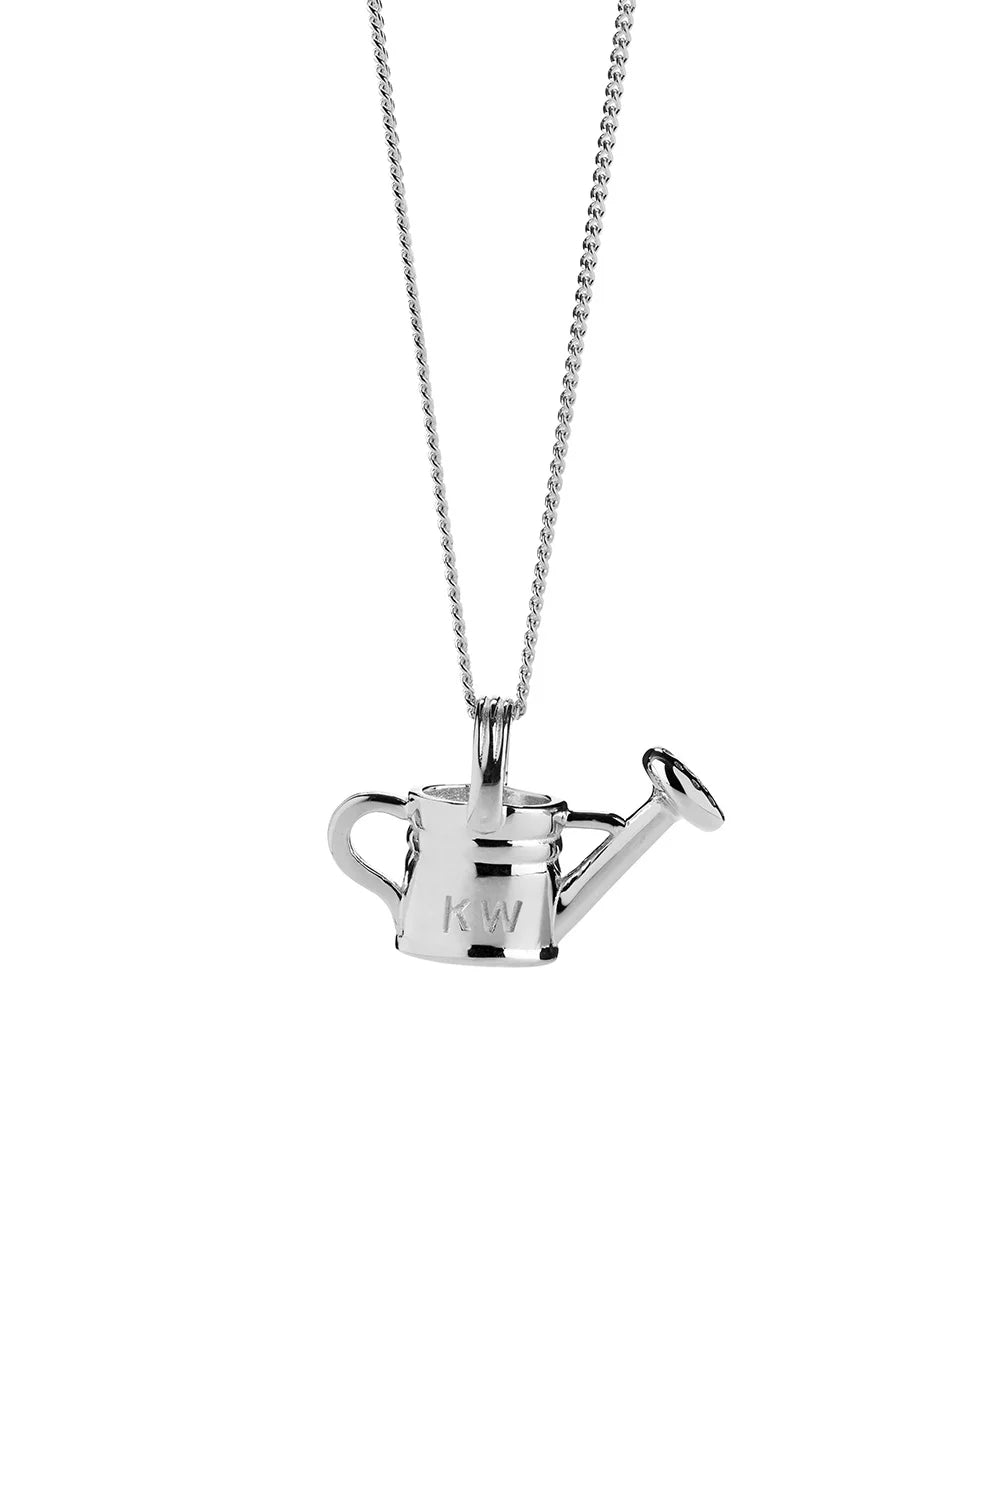 KW Watering Can Necklace Silver